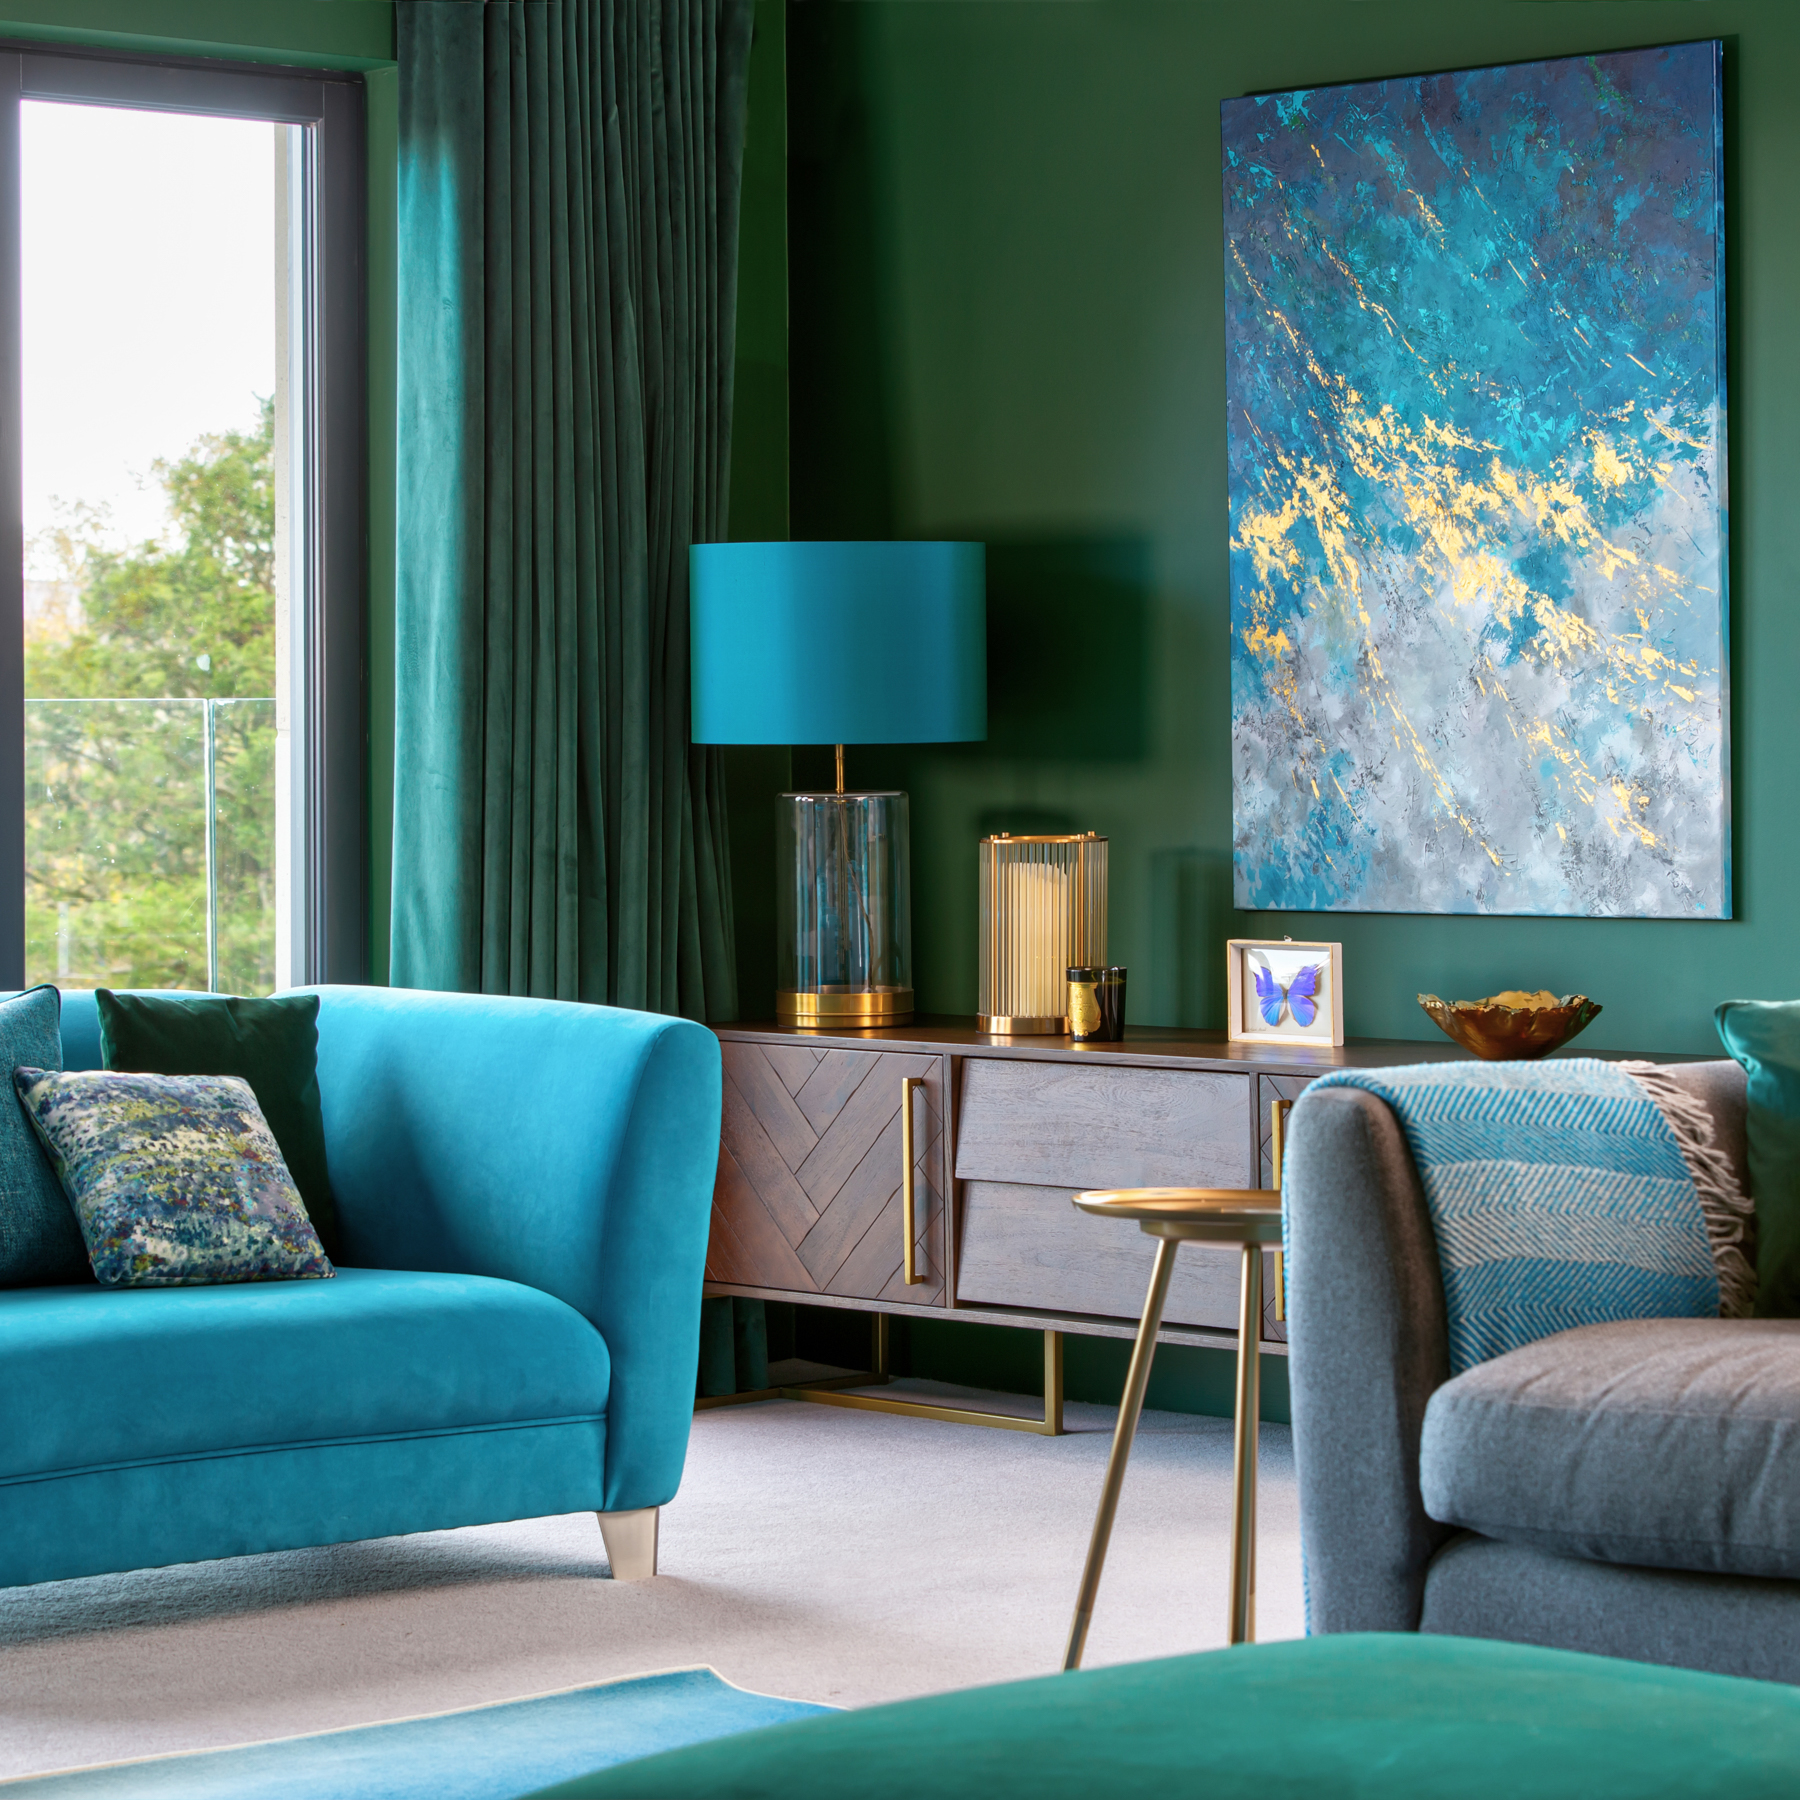 Contemporary living room green walls, teal blue sofa, sideboard with statement lamp